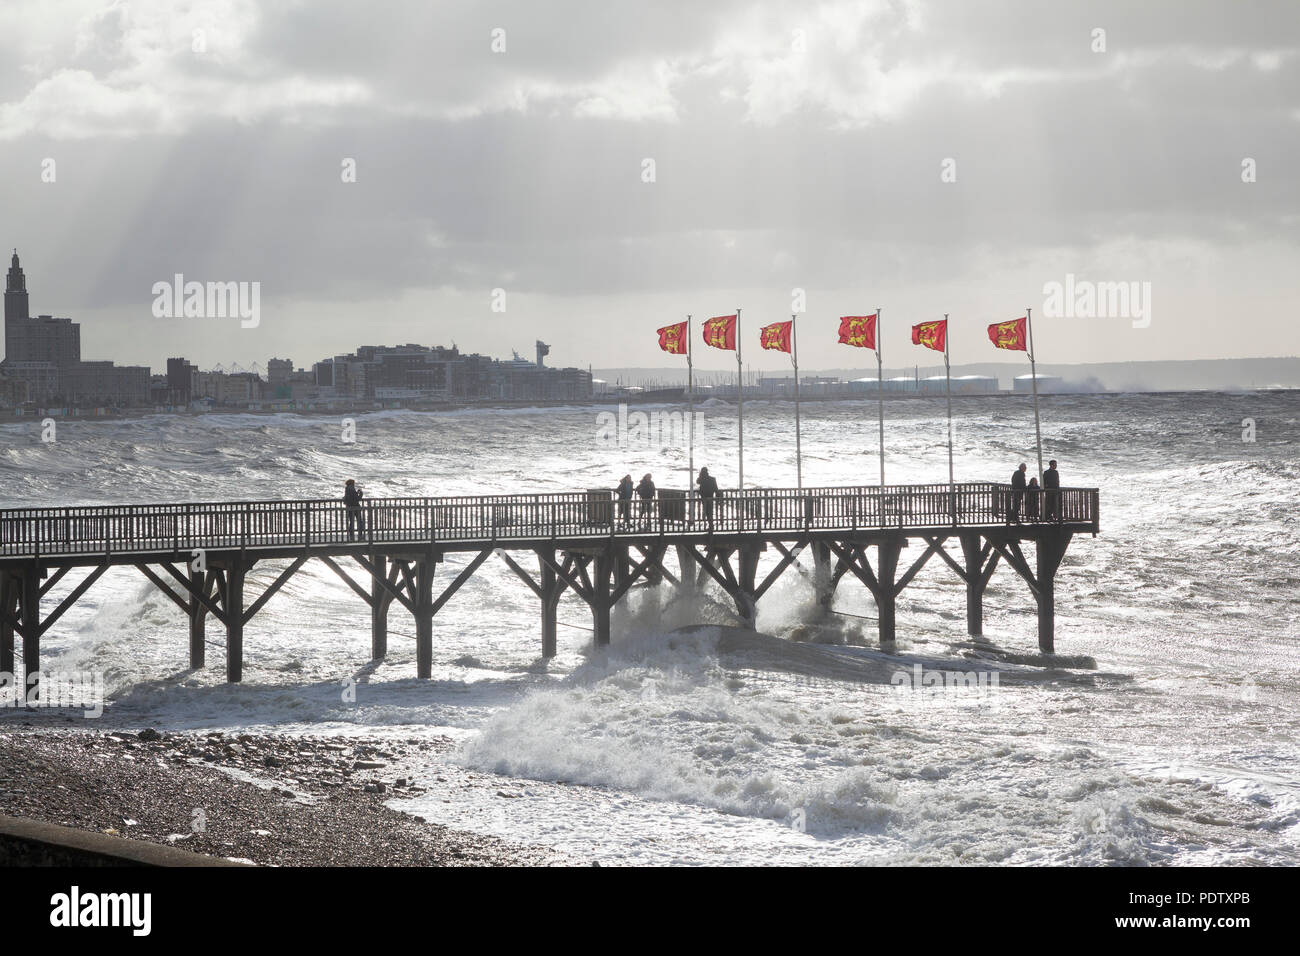 Waves and surf crashing ashore in a winter storm at Sainte Adresse, Le Havre, Normandy, France with the pier silhouetted in the foreground Stock Photo